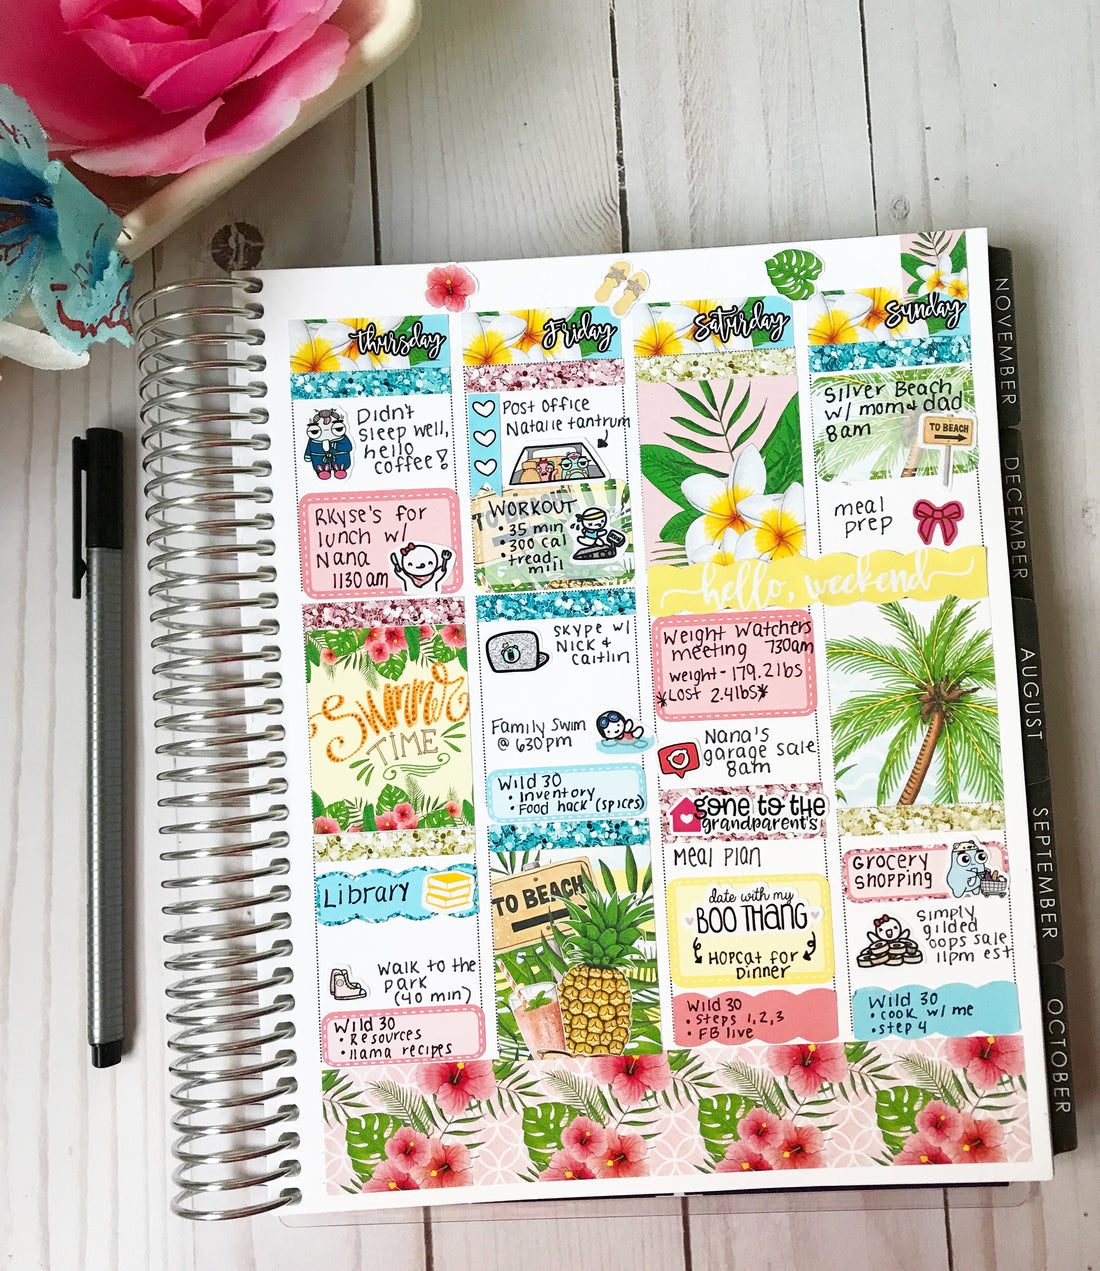 How to Use Your Planner to Get Healthy